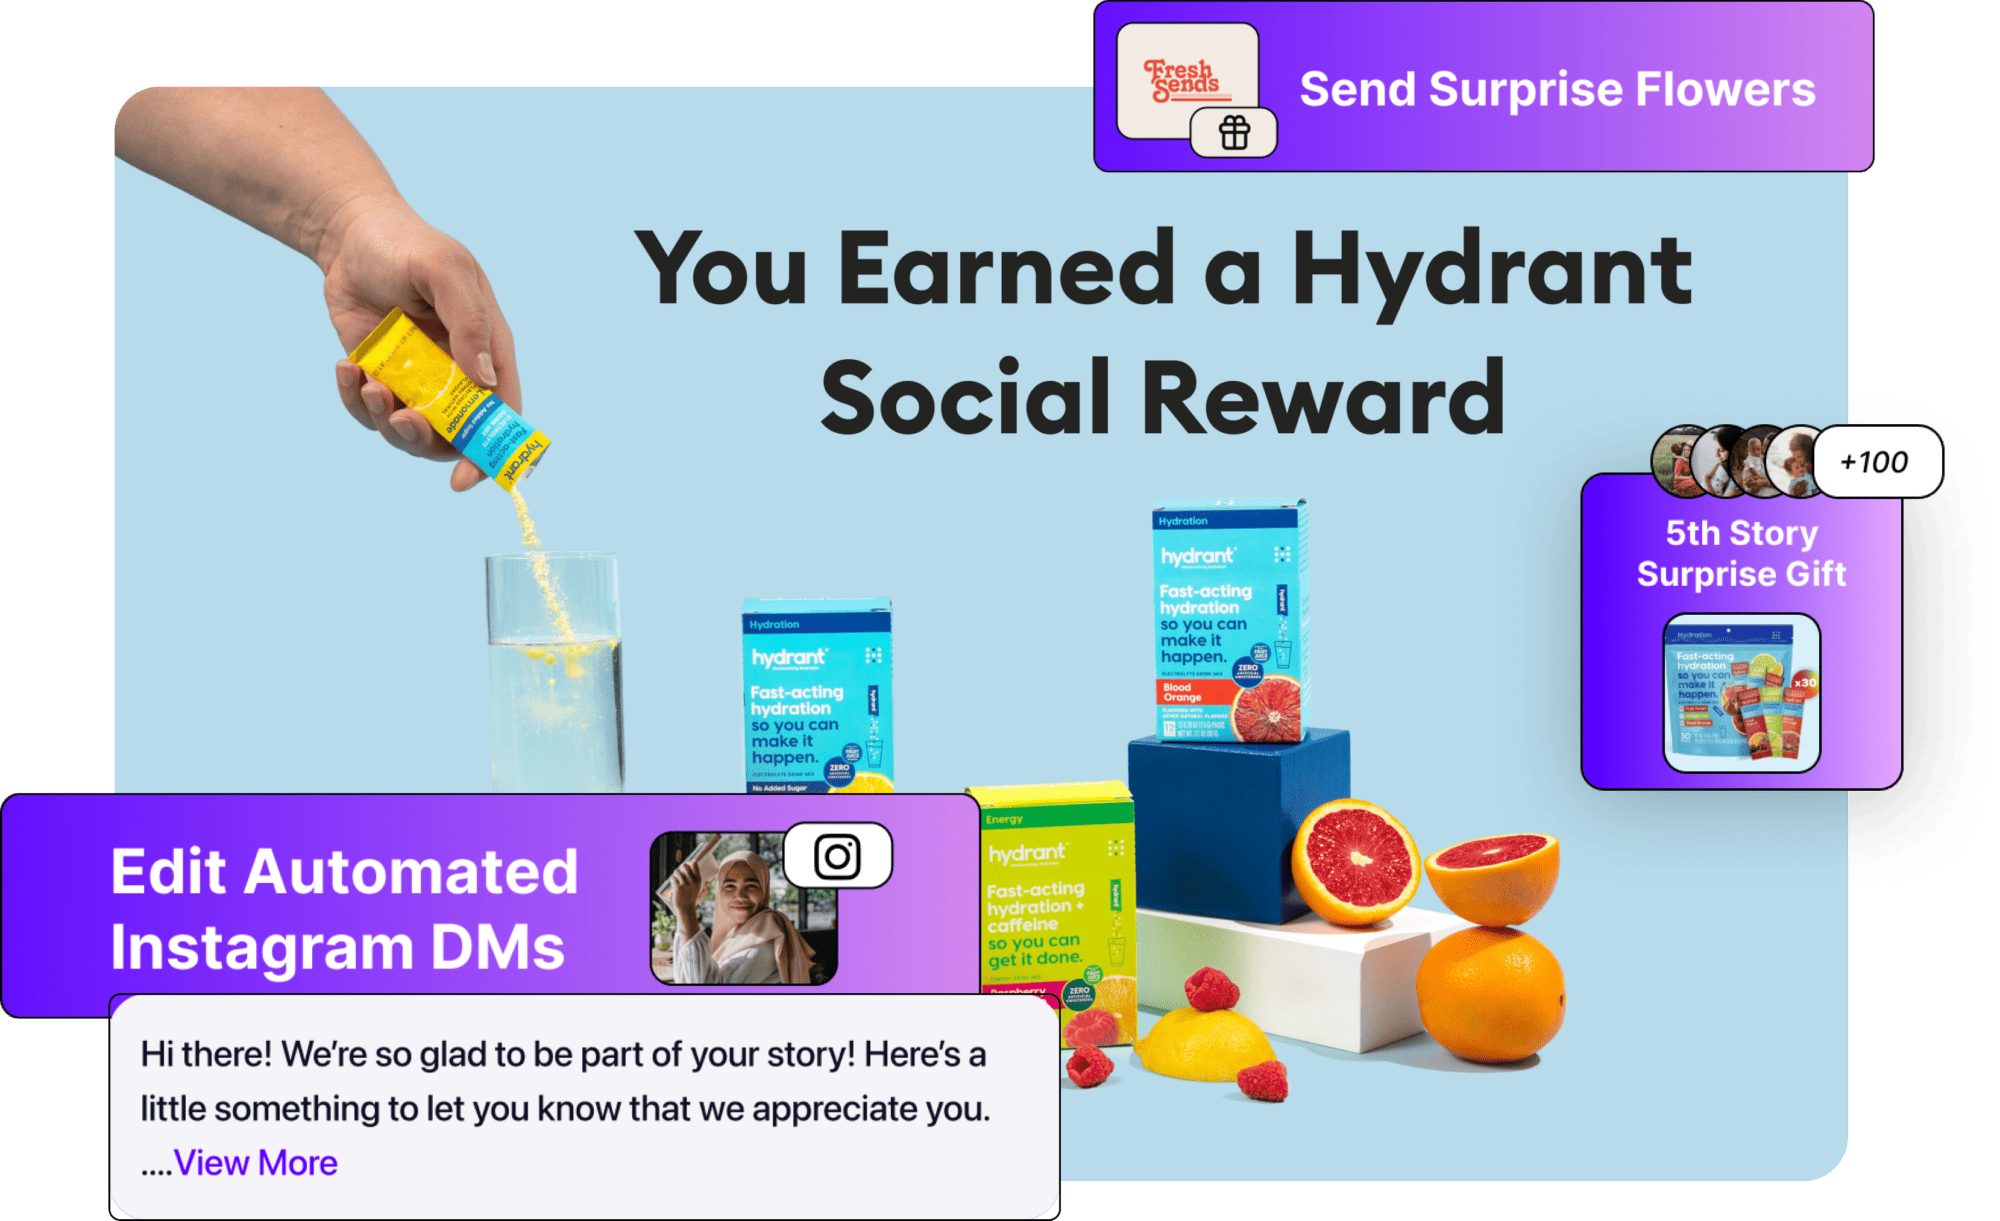 Social gifting, product seeding, automated Instagram DMs